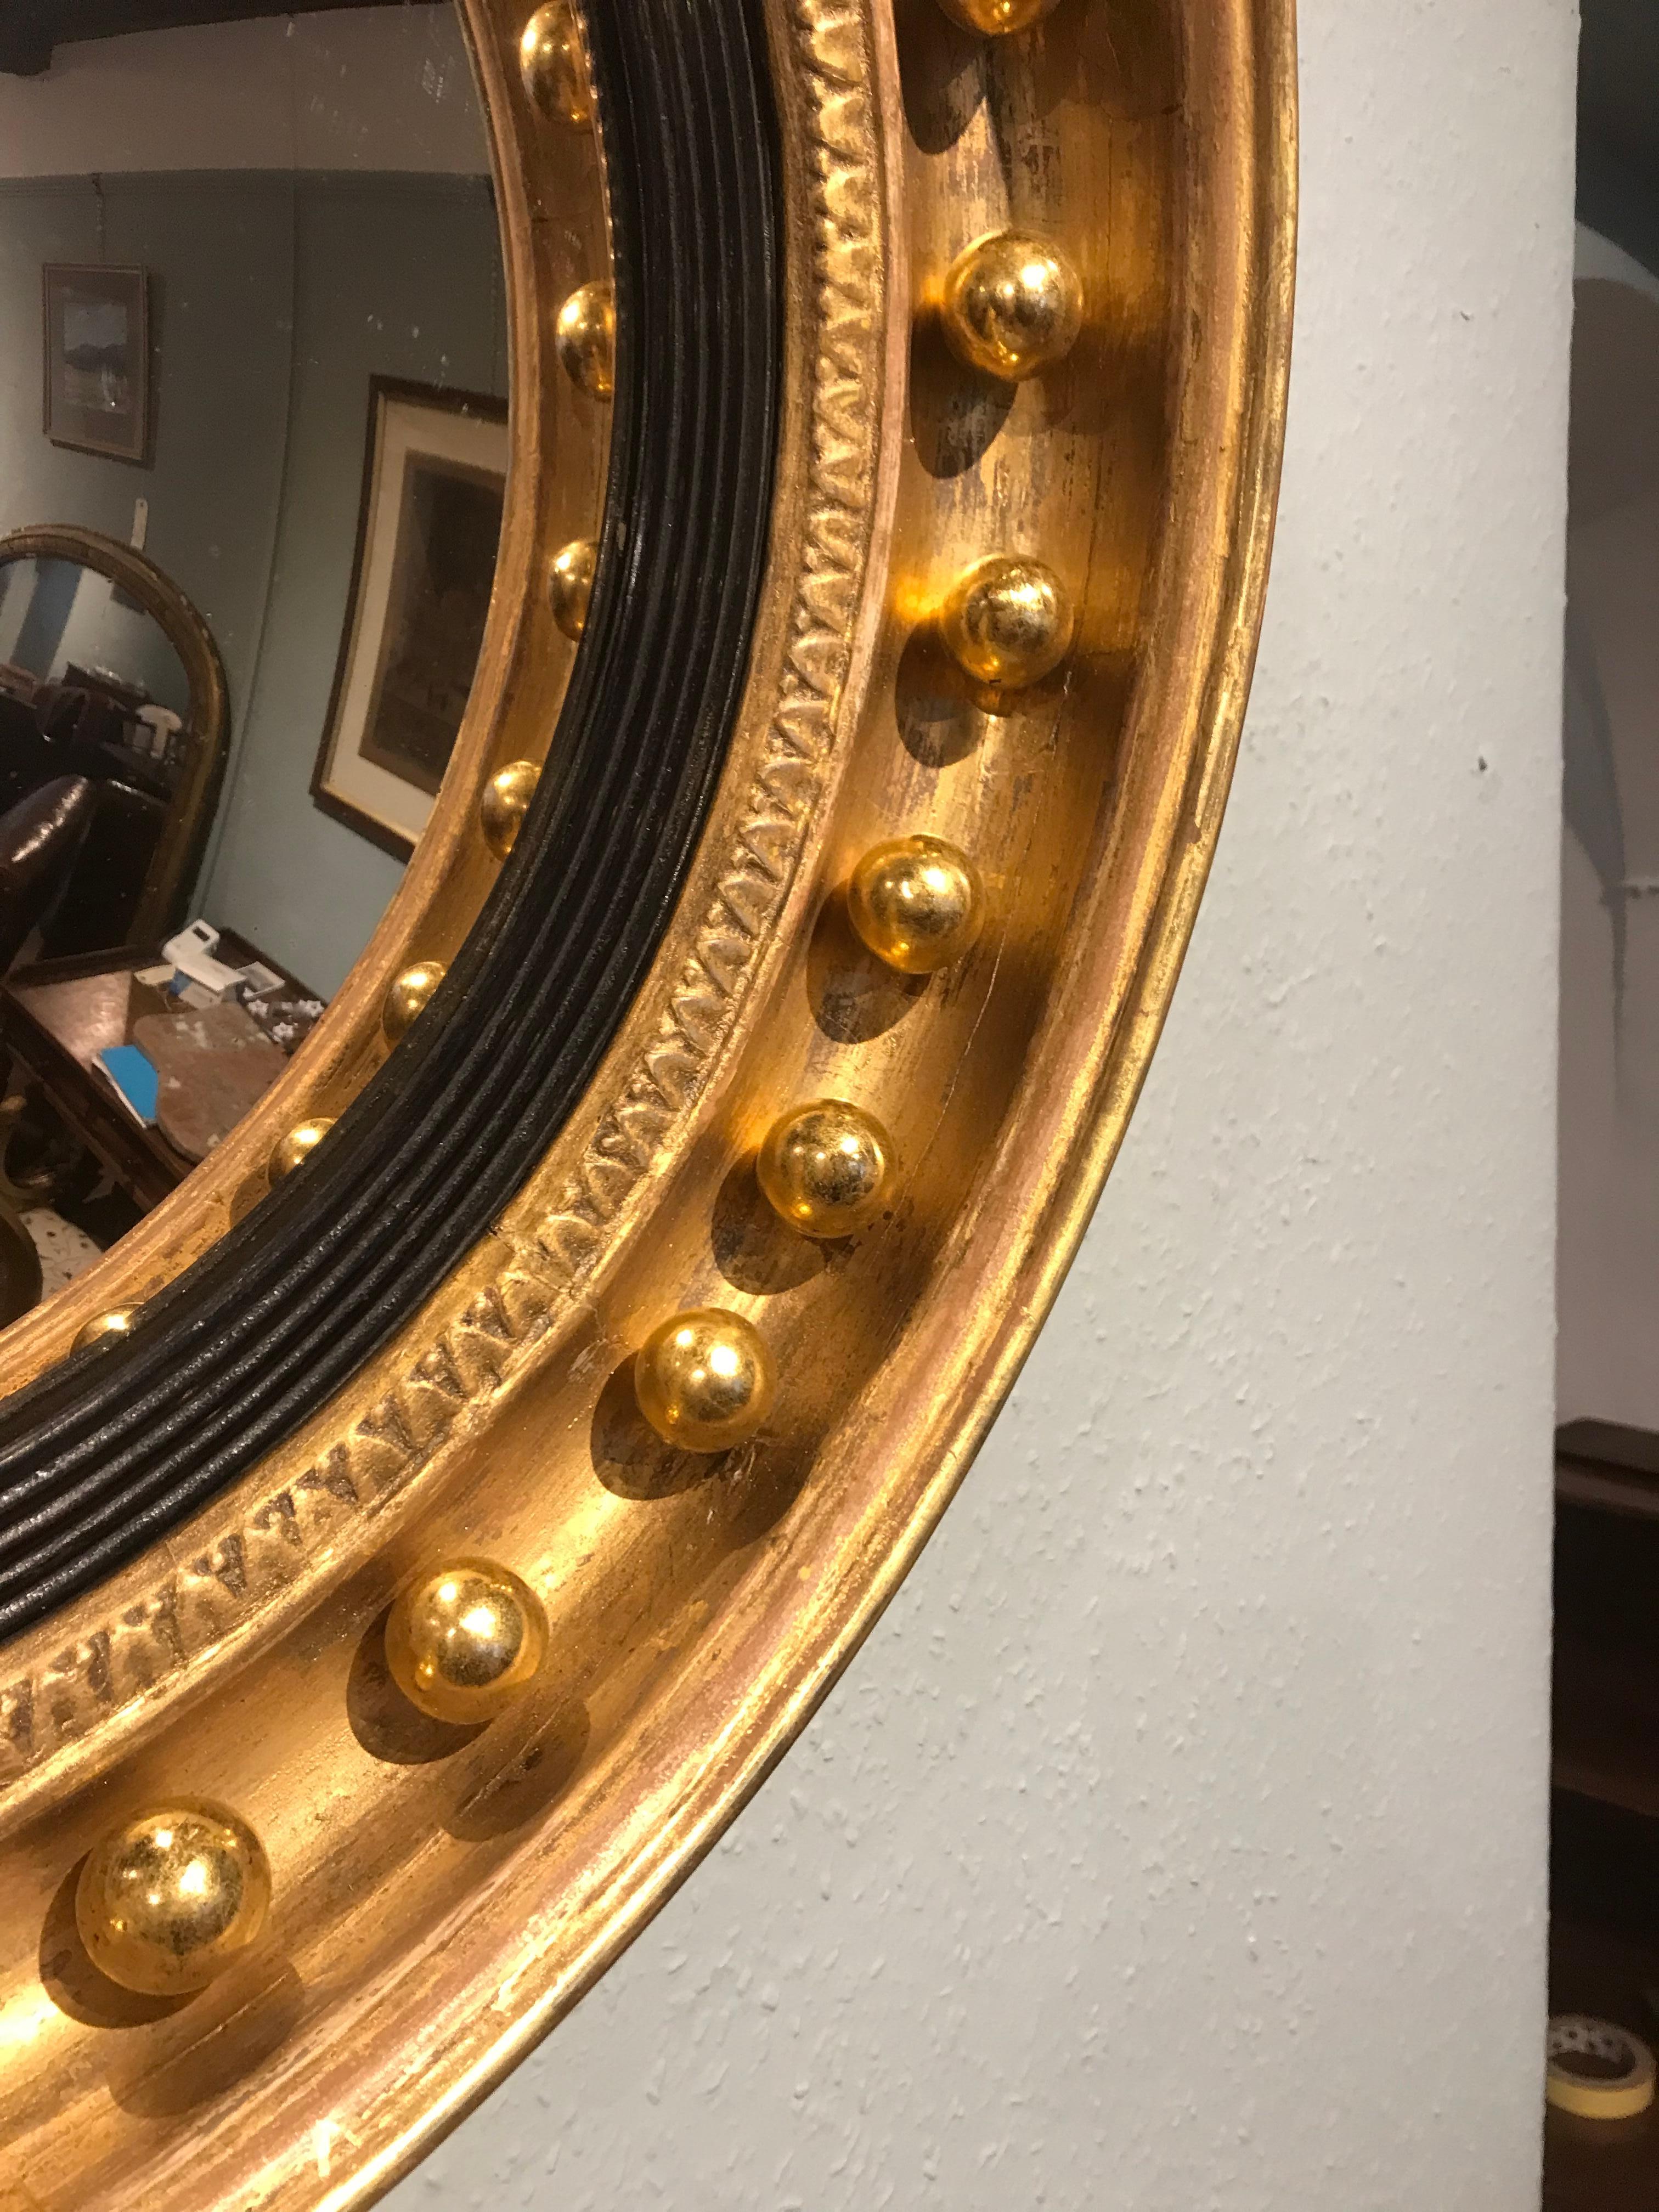 Stunning gilt convex mirror circa 1850. The mirror features a concave frame, decorated water gilded spheres, inset with an ebony reeded slip. The mirror plate is original, ornate carved scroll and leaf decoration to the top.